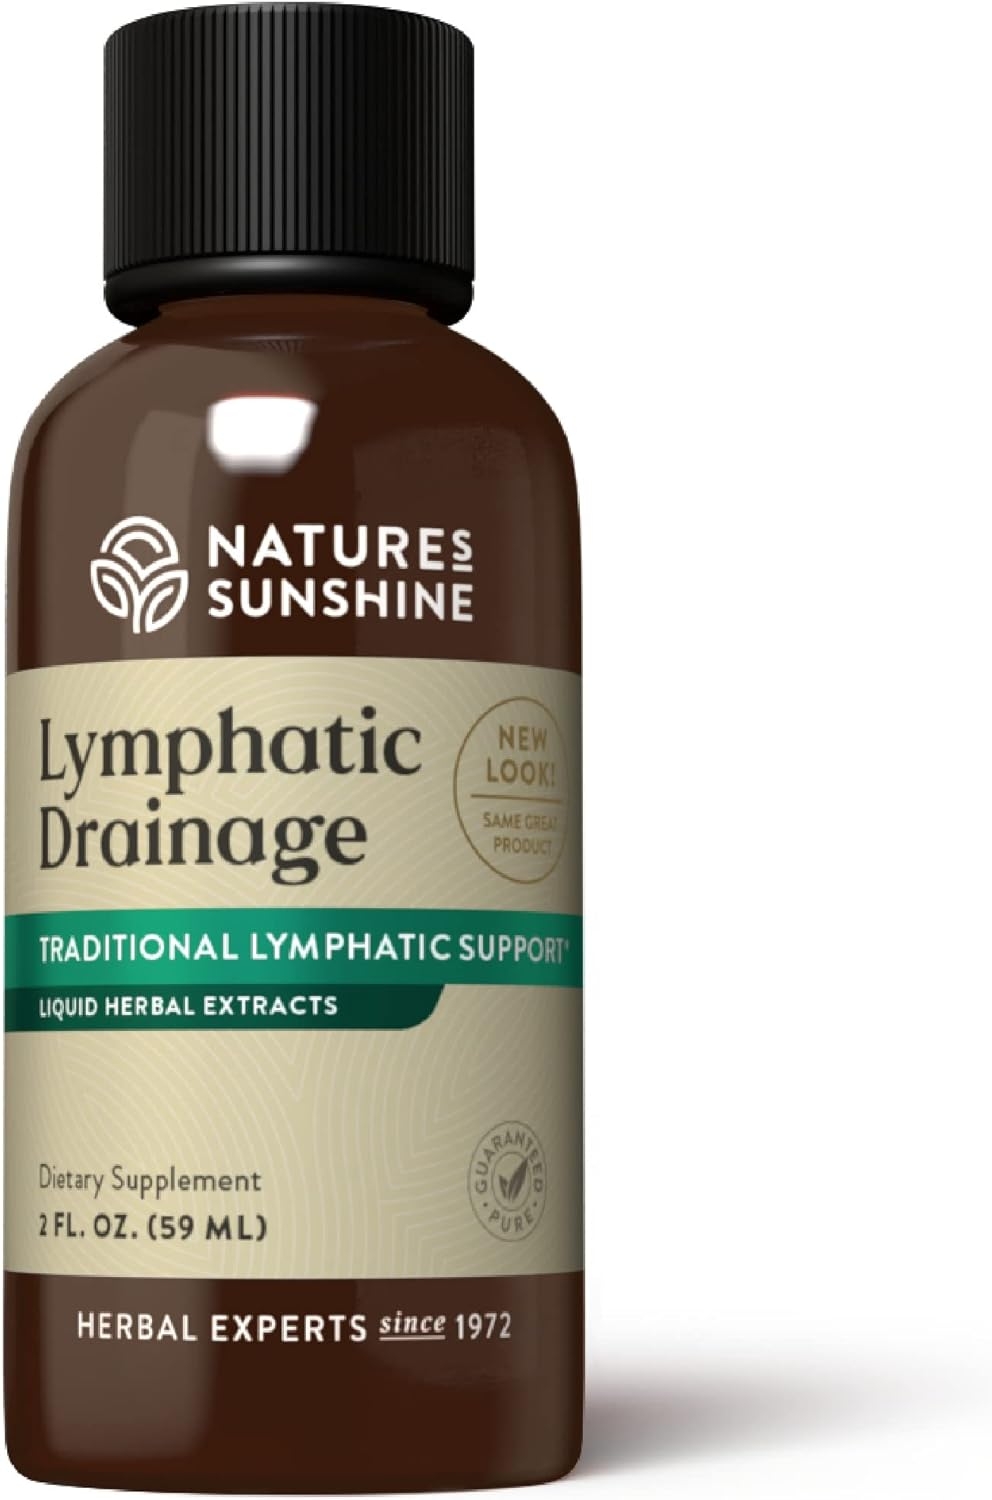 Nature's Sunshine Lymphatic Drainage, 2 Fl. Oz | Lymphatic Drainage Supplement Promotes the Efficient Drainage of the Lymphatic System to Promote Overall Health